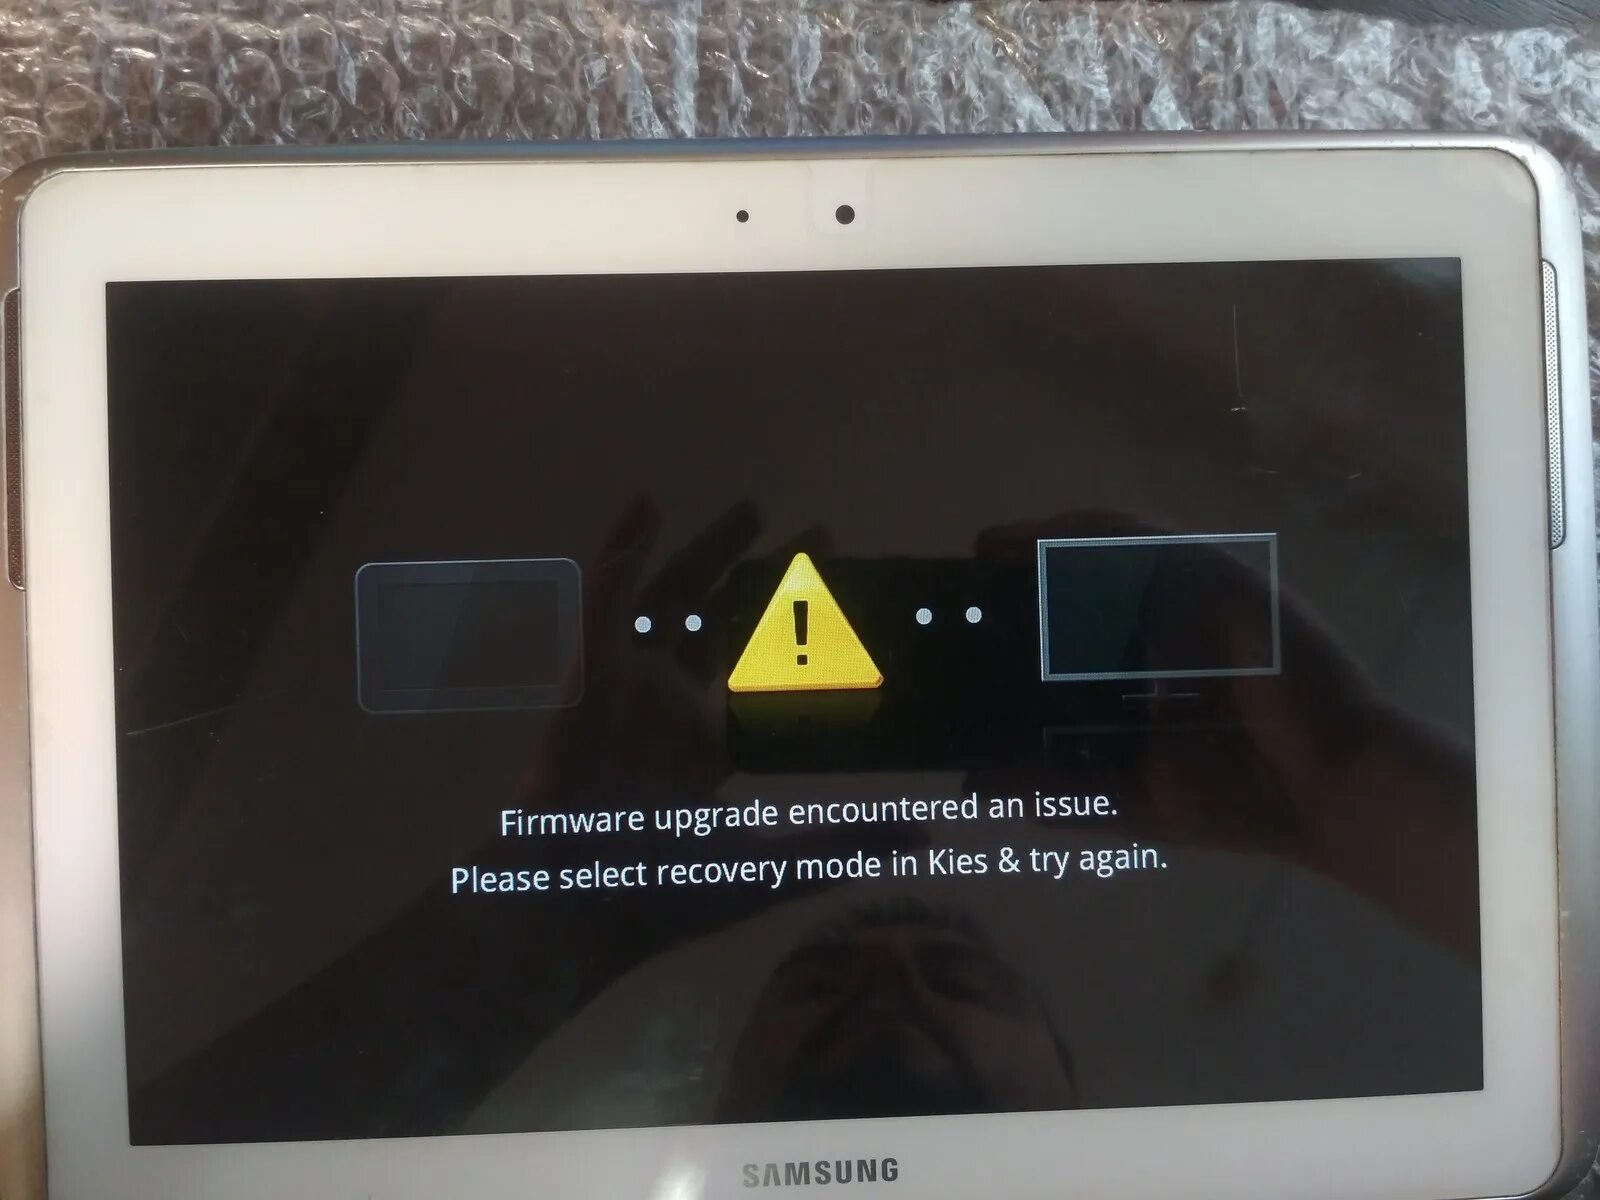 Samsung n8000 Прошивка. N8000 EMMC. Firmware upgrade encountered an Issue please select Recovery Mode in Kies try again. Audi Tablet upgrade Firmware. Планшет сам включается